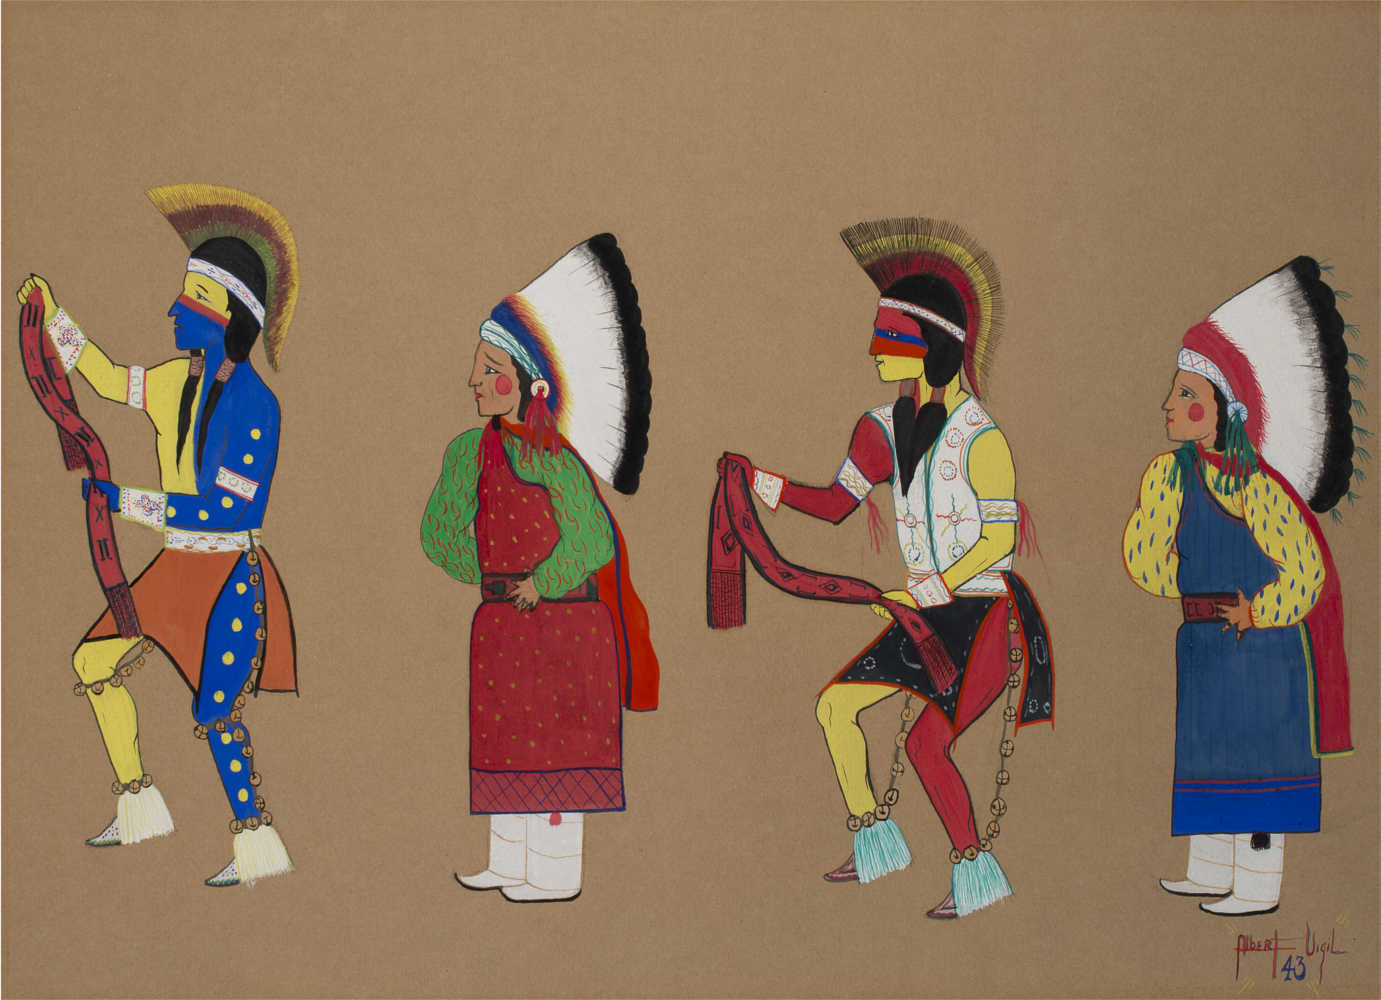 The Heard Museum has selected new works of art for the updated exhibit, *Away From Home: American Indian Boarding School Stories*. These have been acquired since *Remembering Our Indian School Days: The Boarding School Experience* opened in 2000. Among these is Albert Vigil's (San ildefonso Pueblo) “Belt Dancer,” a student painting made at age 16 at Santa Fe Indian School, 1943. Gift of Duane and Jean Humilickek. 4460-14. Image courtesy of the Heard Museum.